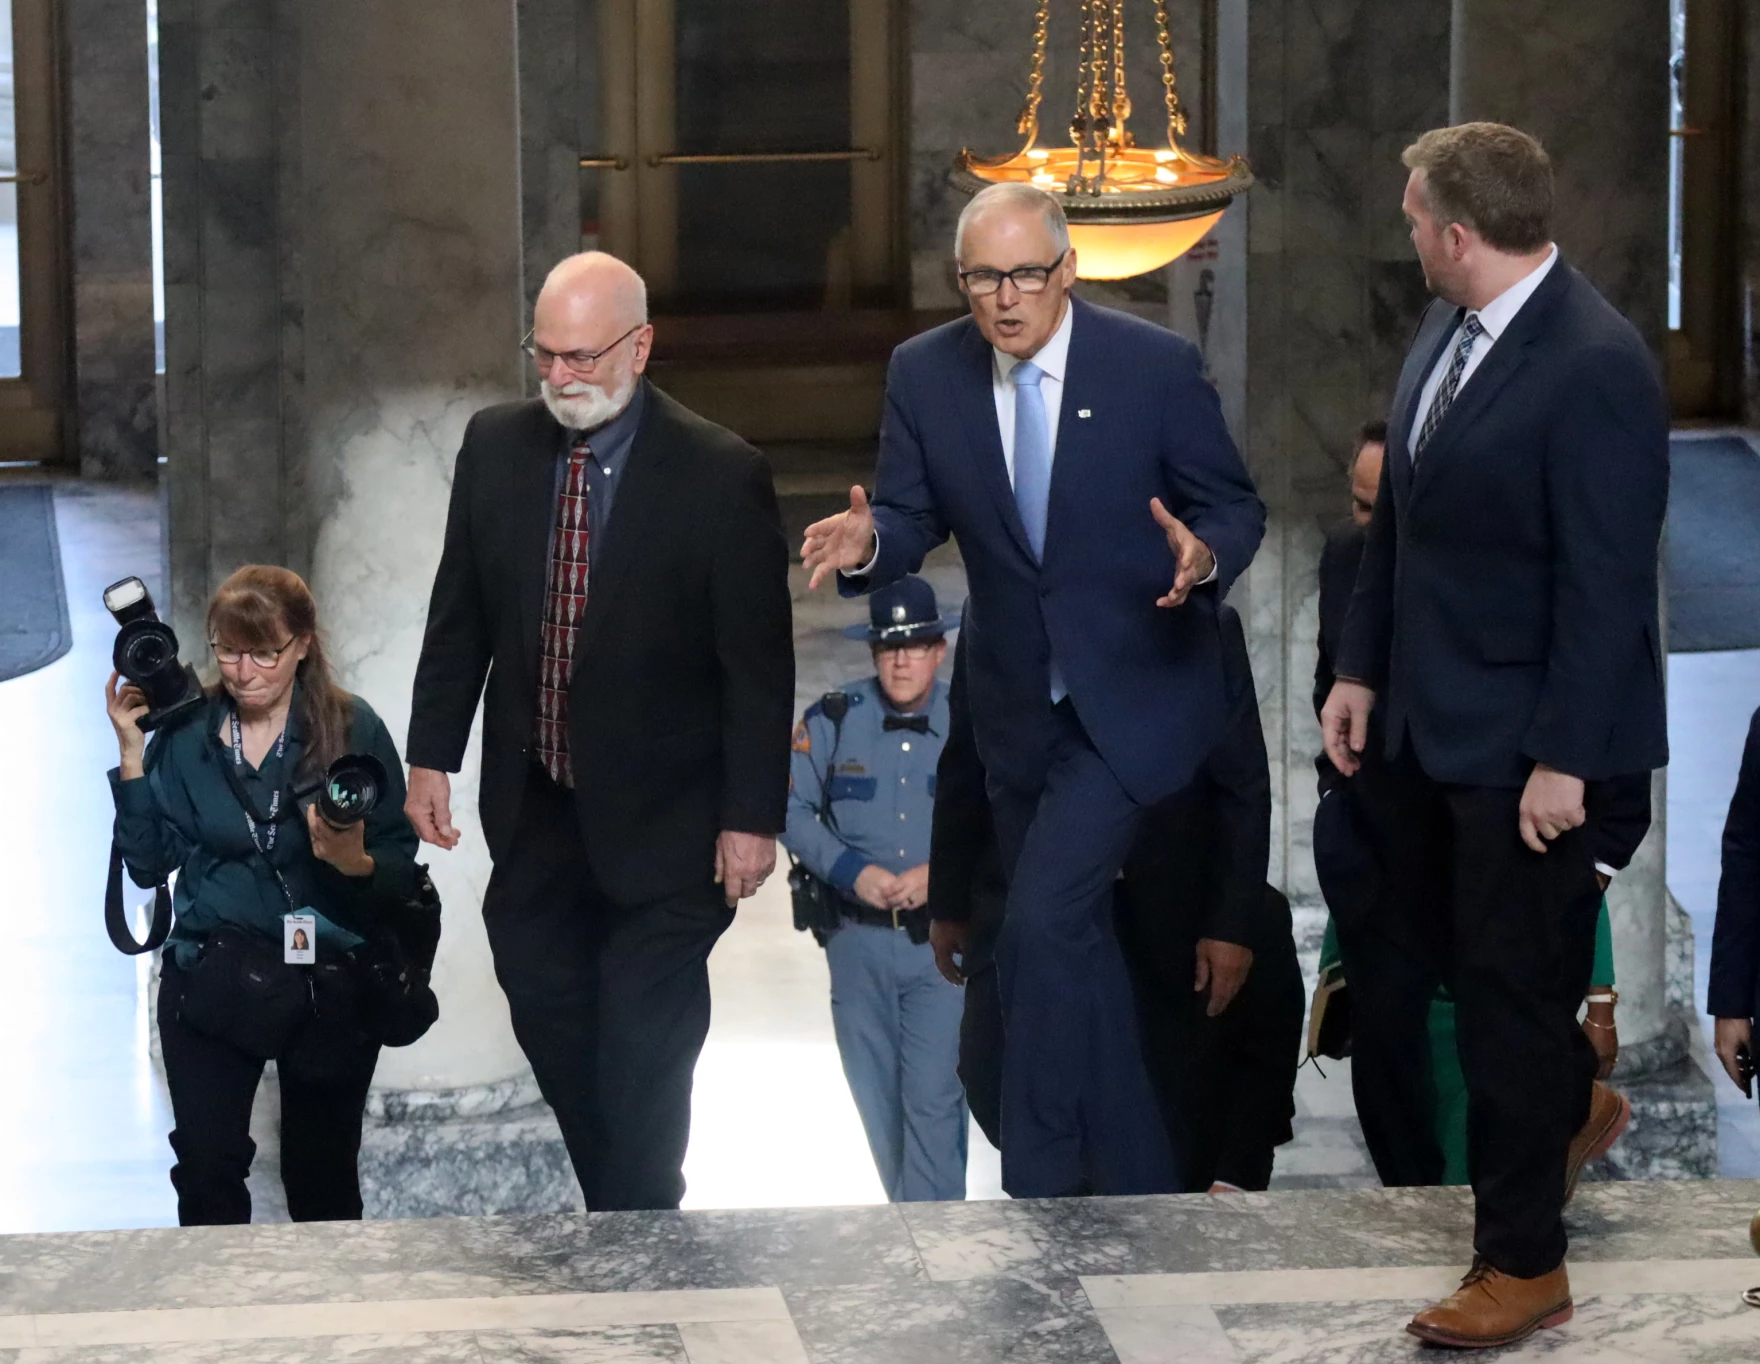 Washington Gov. Jay Inslee walks through the Capitol building in Olympia, en route to deliver his annual State of the State address, Jan. 10, 2023